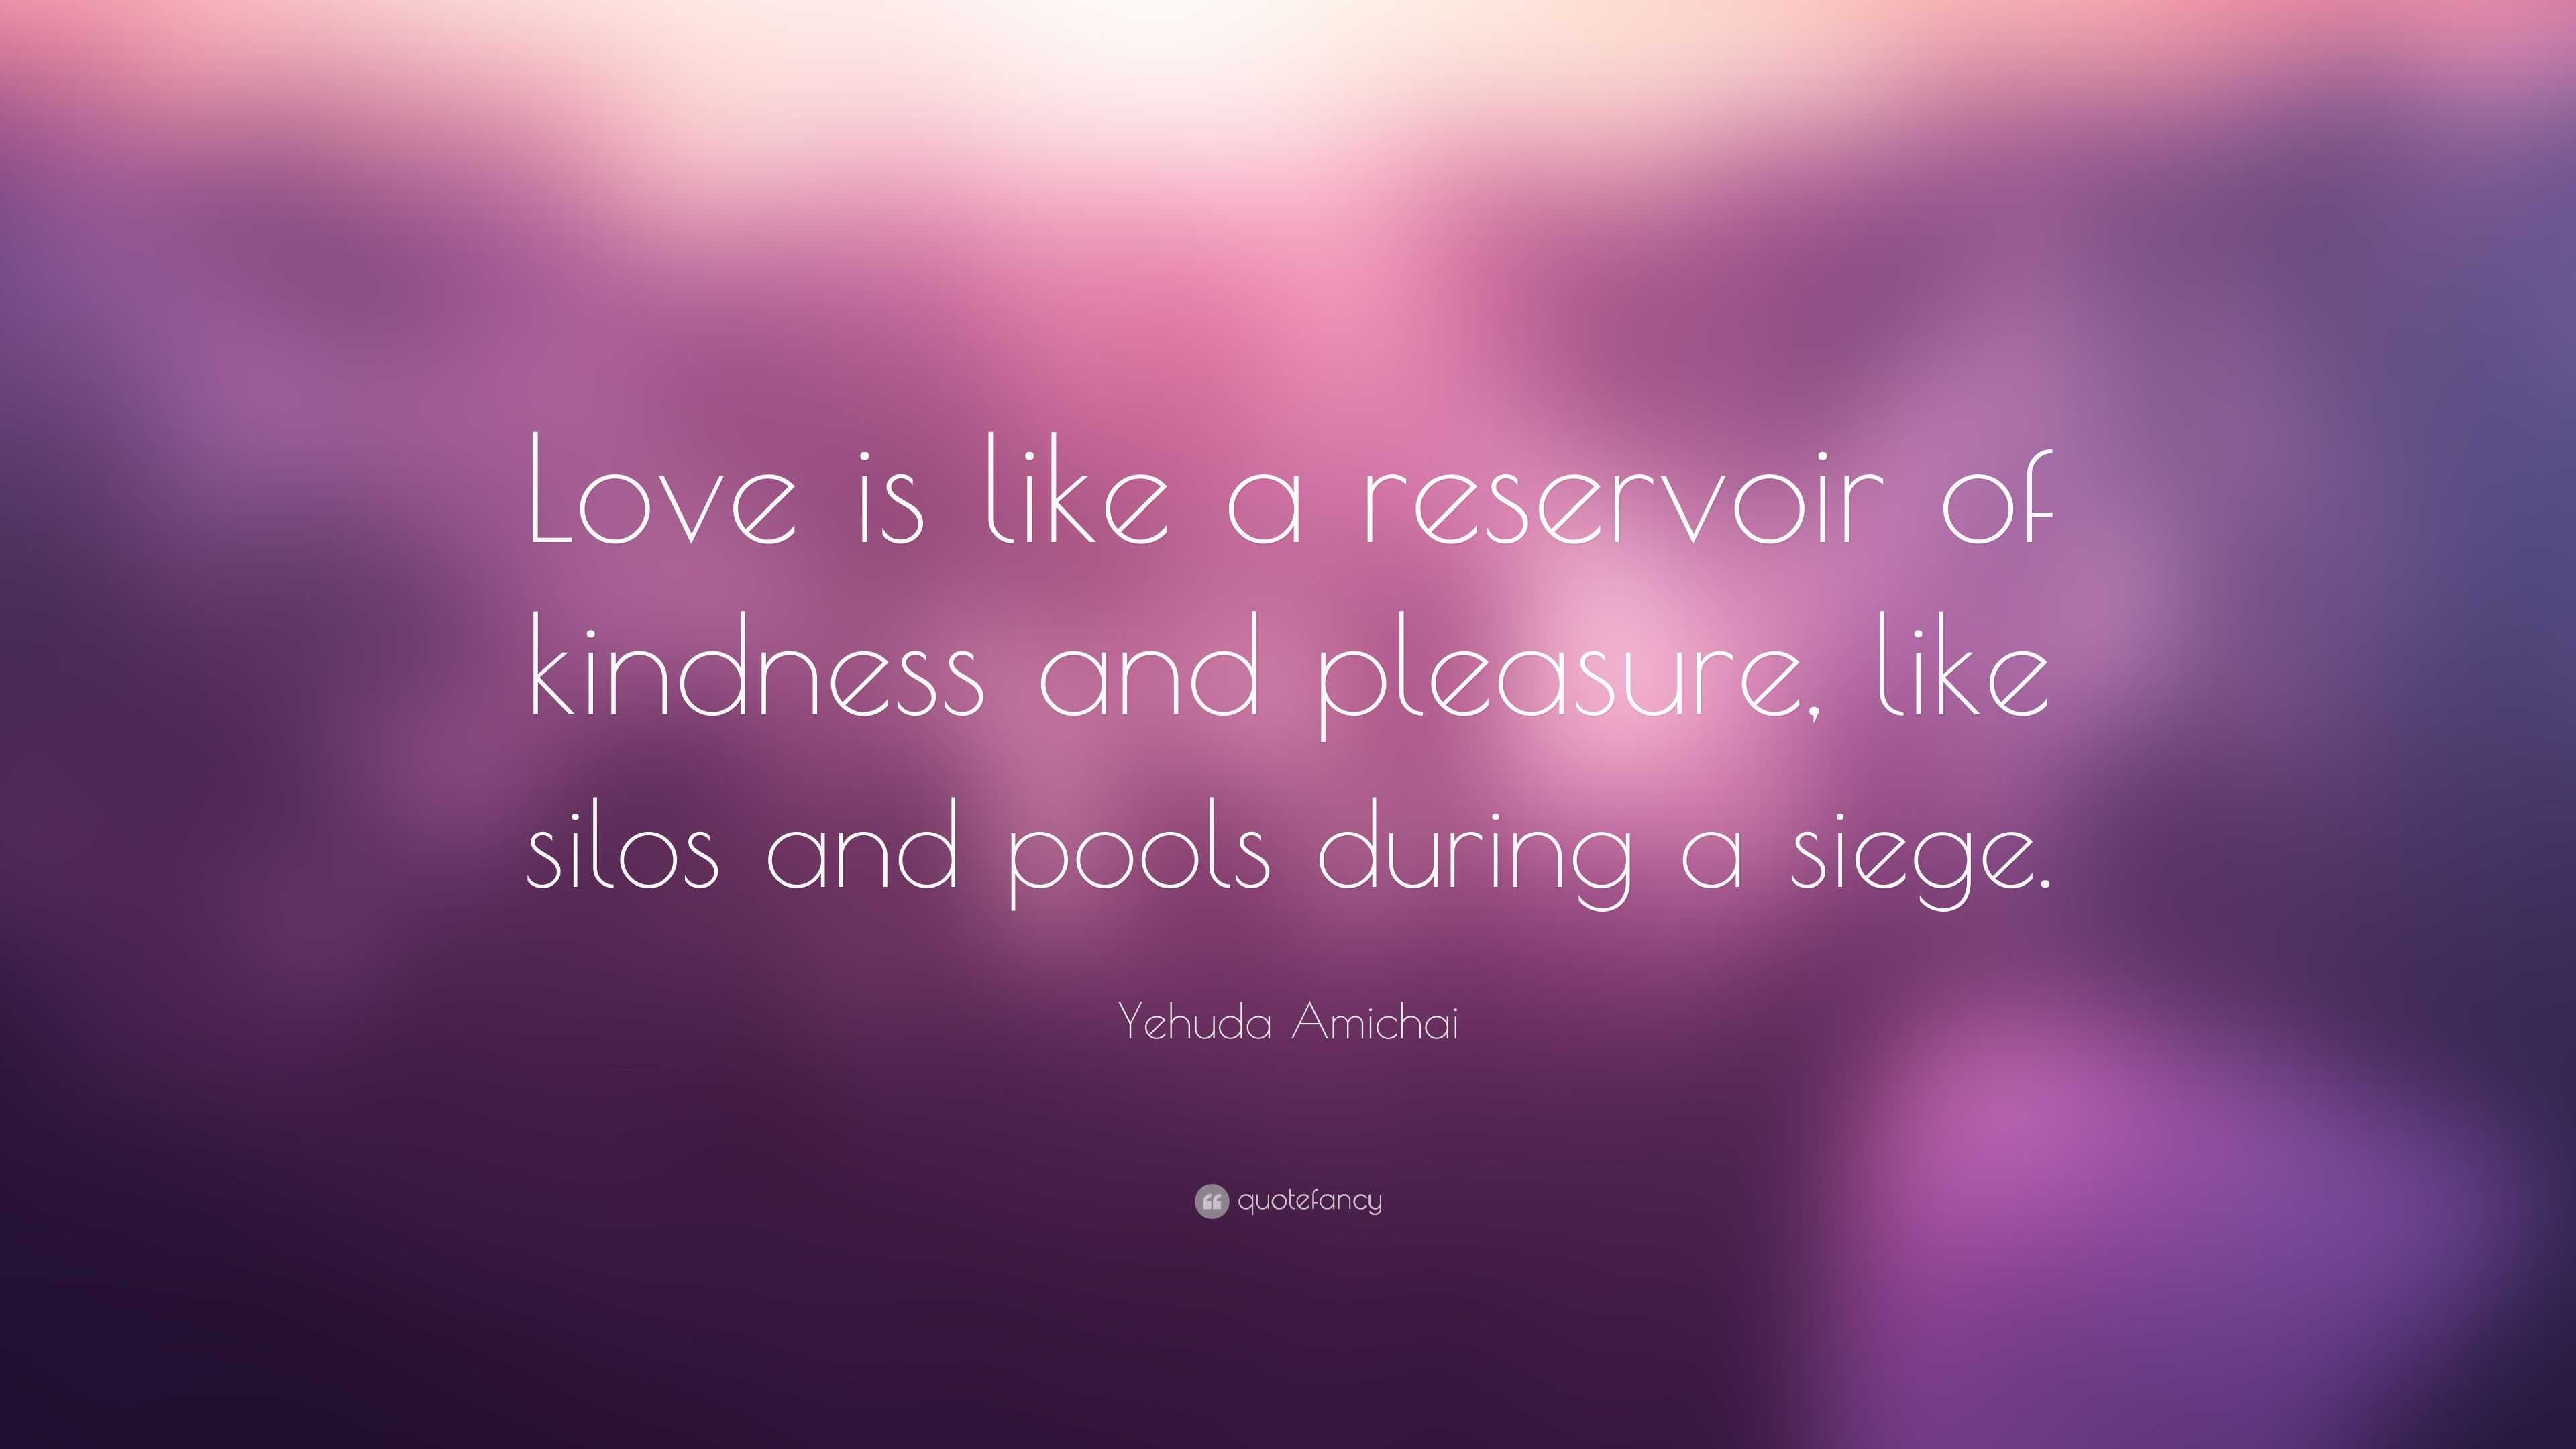 Yehuda Amichai Quote “Love is like a reservoir of kindness and pleasure like